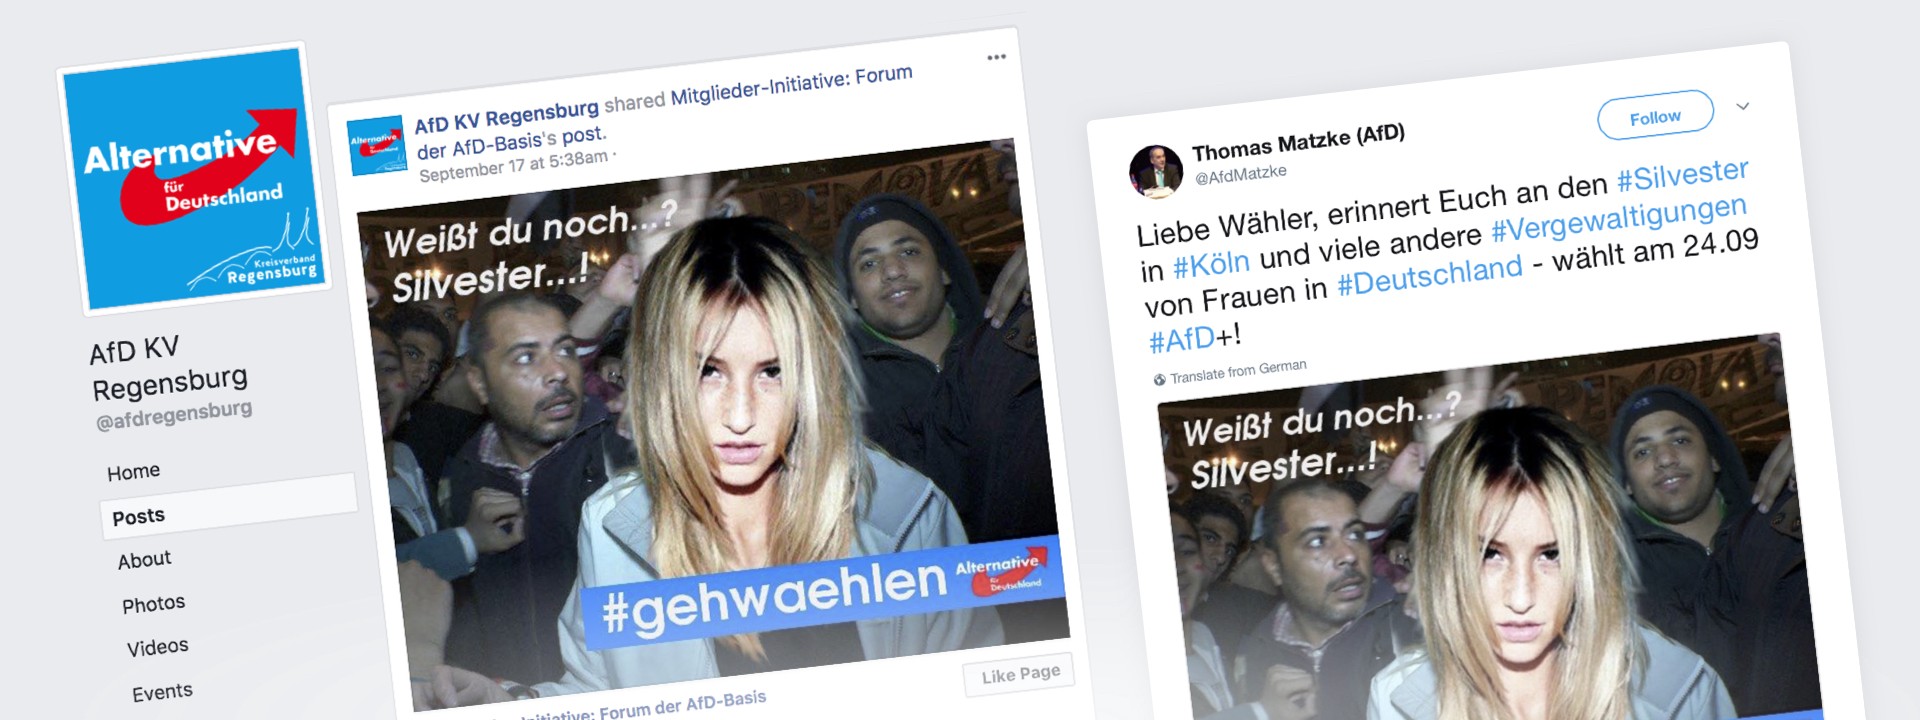 #ElectionWatch: Germany’s AfD Utilizes Fake Imagery Ahead of Election